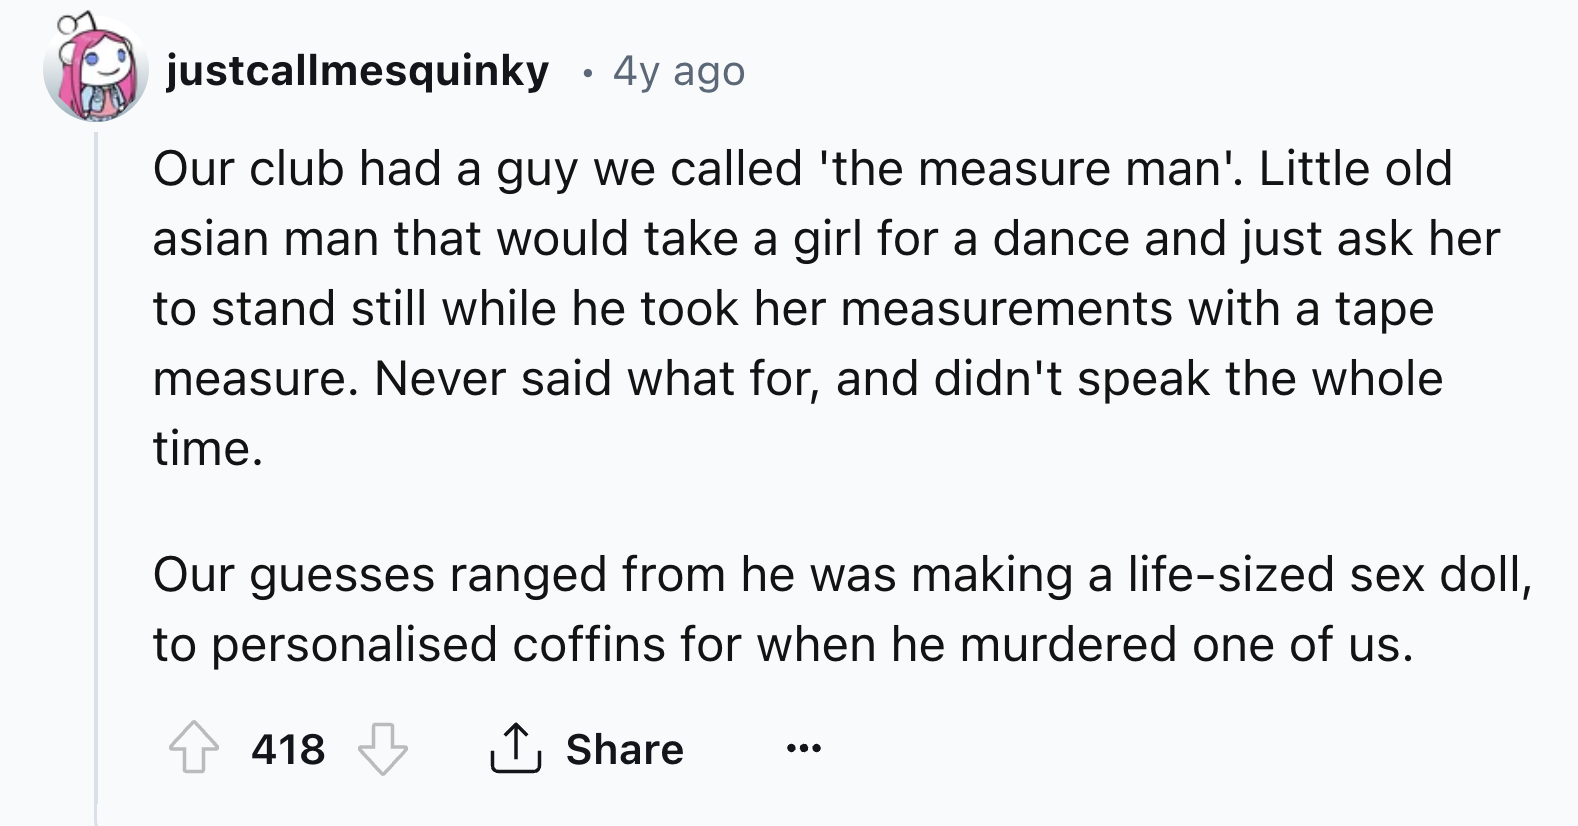 number - justcallmesquinky 4y ago Our club had a guy we called 'the measure man'. Little old asian man that would take a girl for a dance and just ask her to stand still while he took her measurements with a tape measure. Never said what for, and didn't s